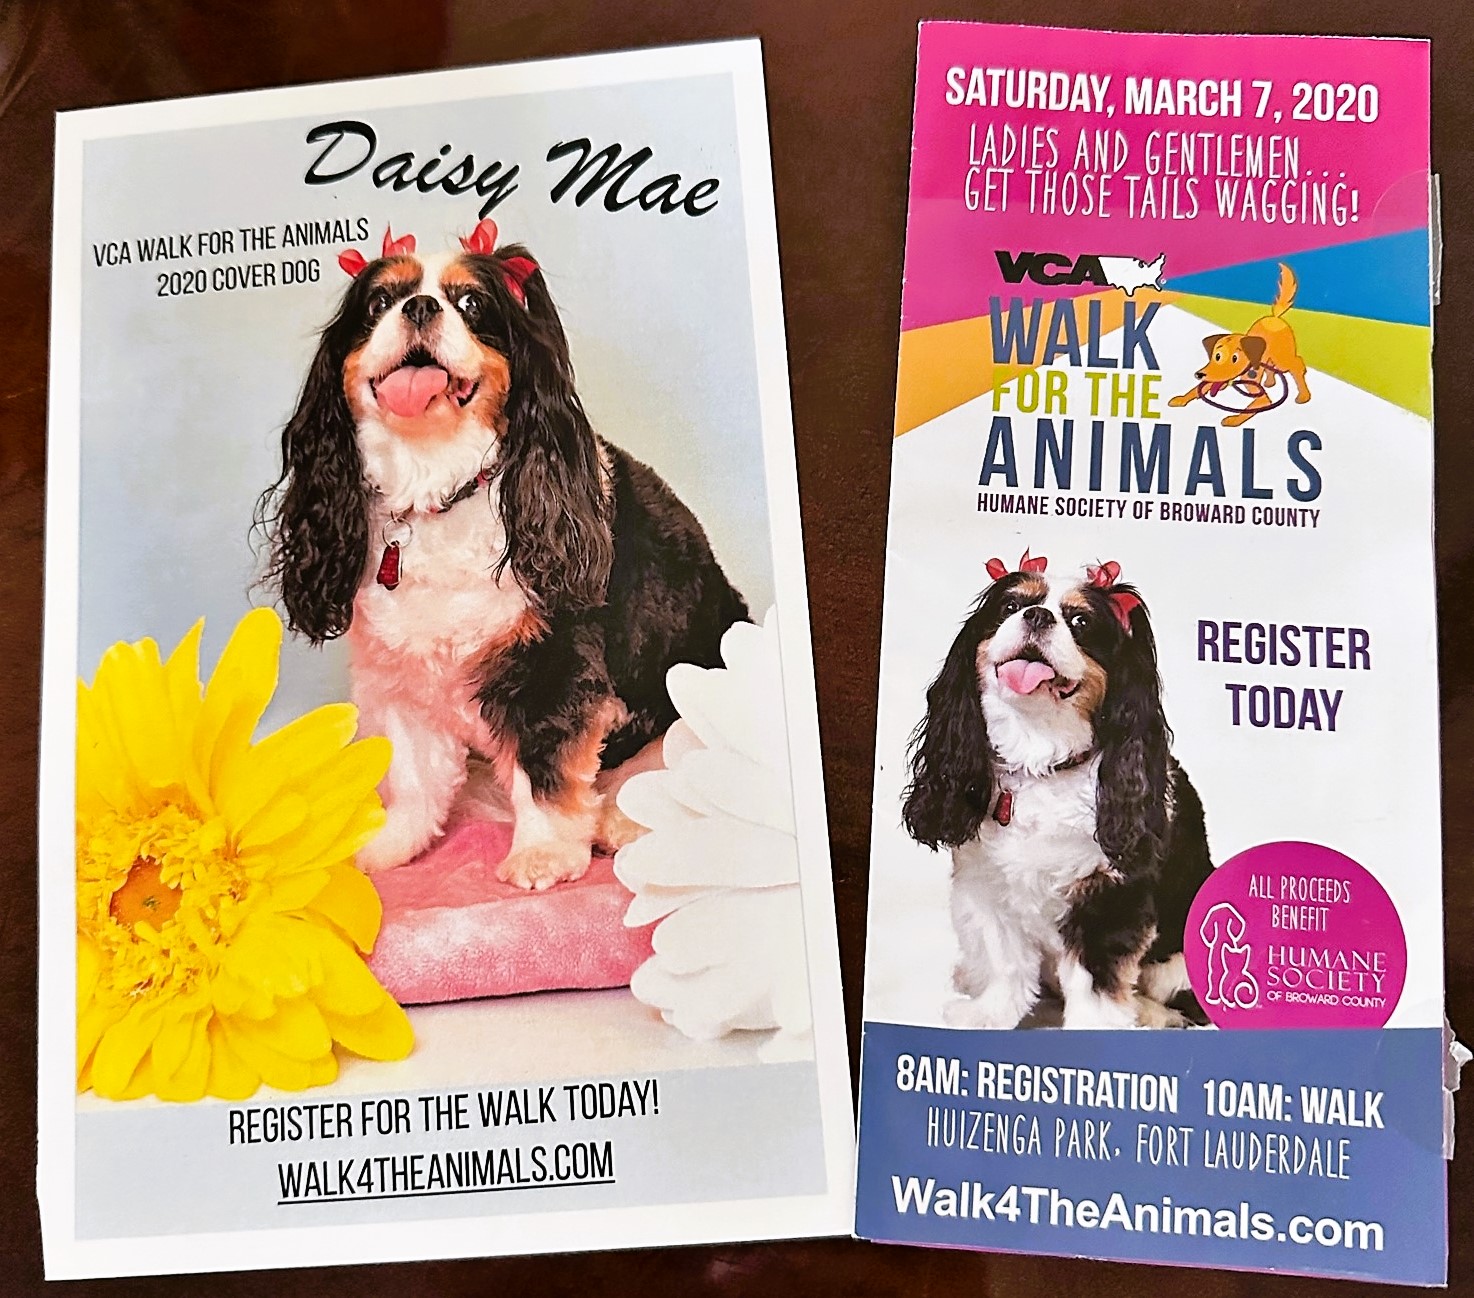 2020 Walk for the Animals Cover Dog Daisy Mae